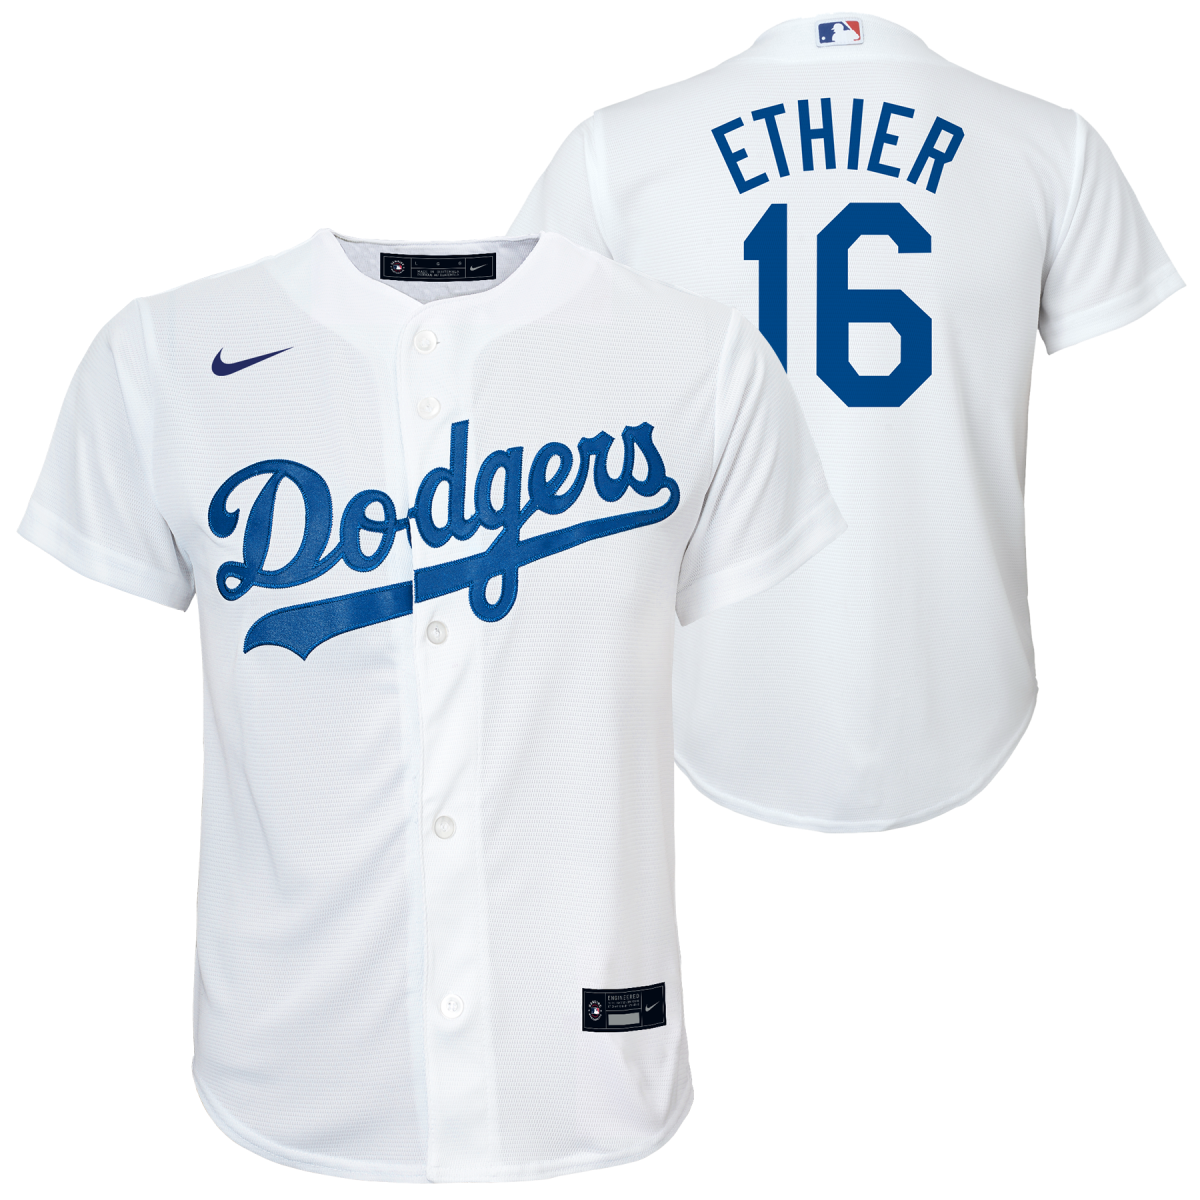 Andre Ethier Youth Jersey - La Dodgers Youth Home Jersey